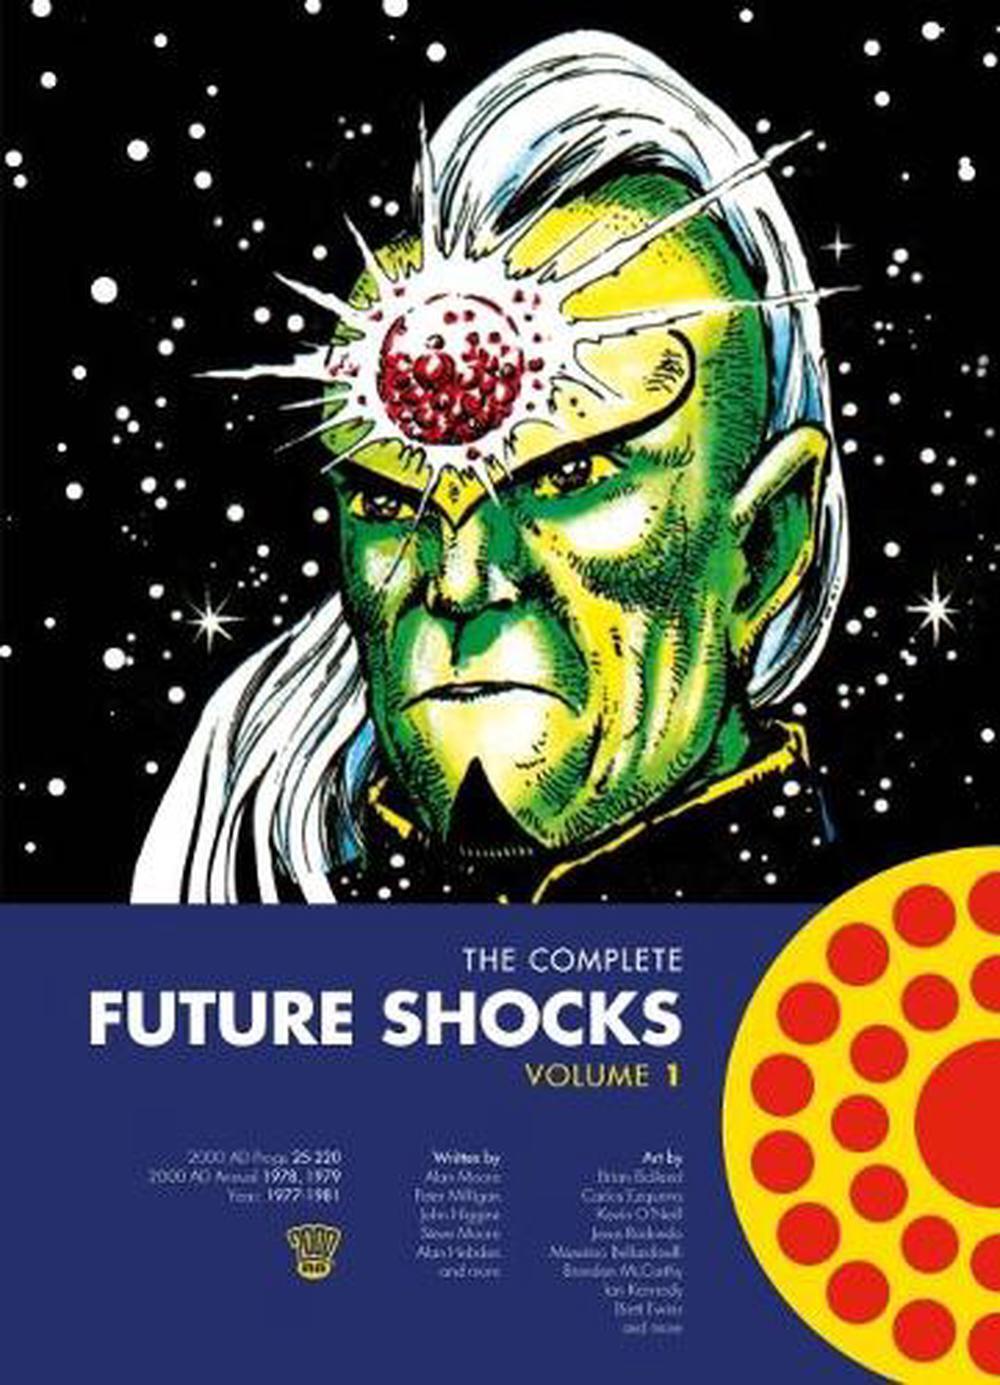 The Complete Future Shocks, Volume One by Alan Moore (English) Paperback Book